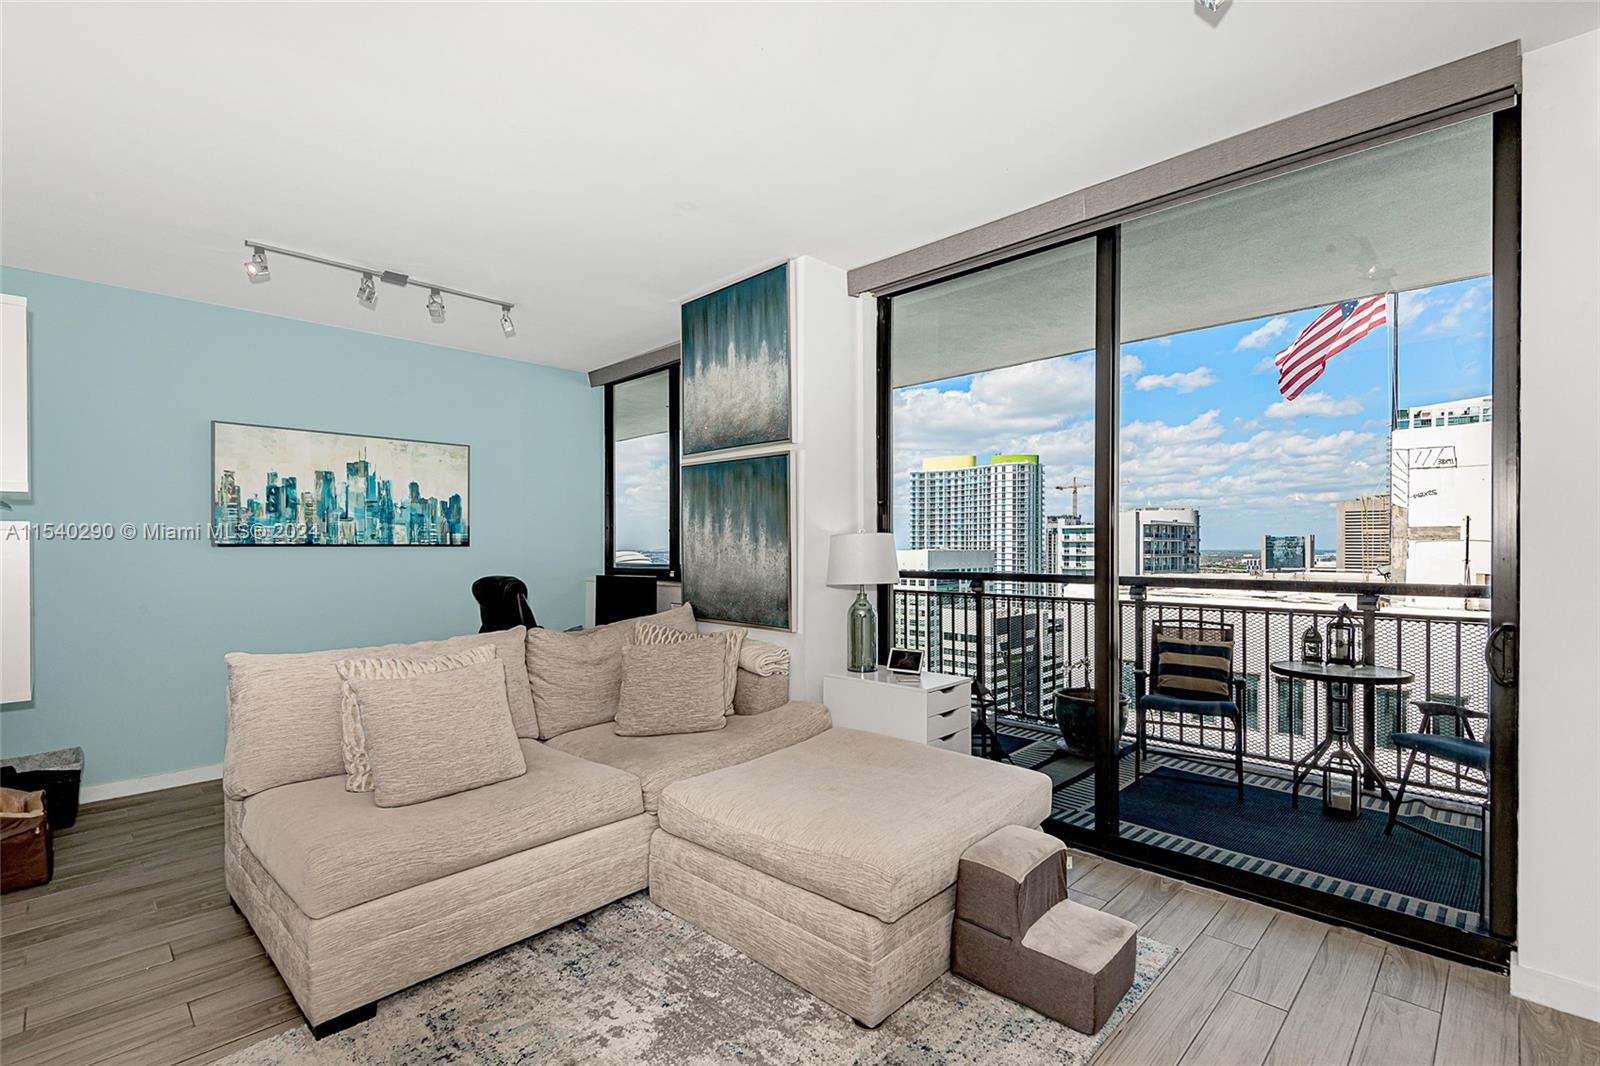 AVAILABLE EITHER FULLY FURNISHED OR UNFURNISHED AS TENANCY PREFERS - Ready to Lease - High floor, spacious 1/1 at The Nine - the center of everything Brickell.  Quality finishes and furnishings in every room.  This oversized 1/1 offers massive closet and storage spaces including an additional walk-in closet the size of most Brickell bedrooms.  High floor residence with private oversized balcony and assigned self parking - a rare and valuable find for a Brickell 1/1.  Nine offers many well-appointed amenities including a gorgeous newly renovated pool, large well equipped Fitness Center, open use Library with printing services, glass enclosed Conference Room, spacious Club Room, multi-use Game Room, beautiful Childrens playroom - Plus - Publix is literally right downstairs.  Easy to show.